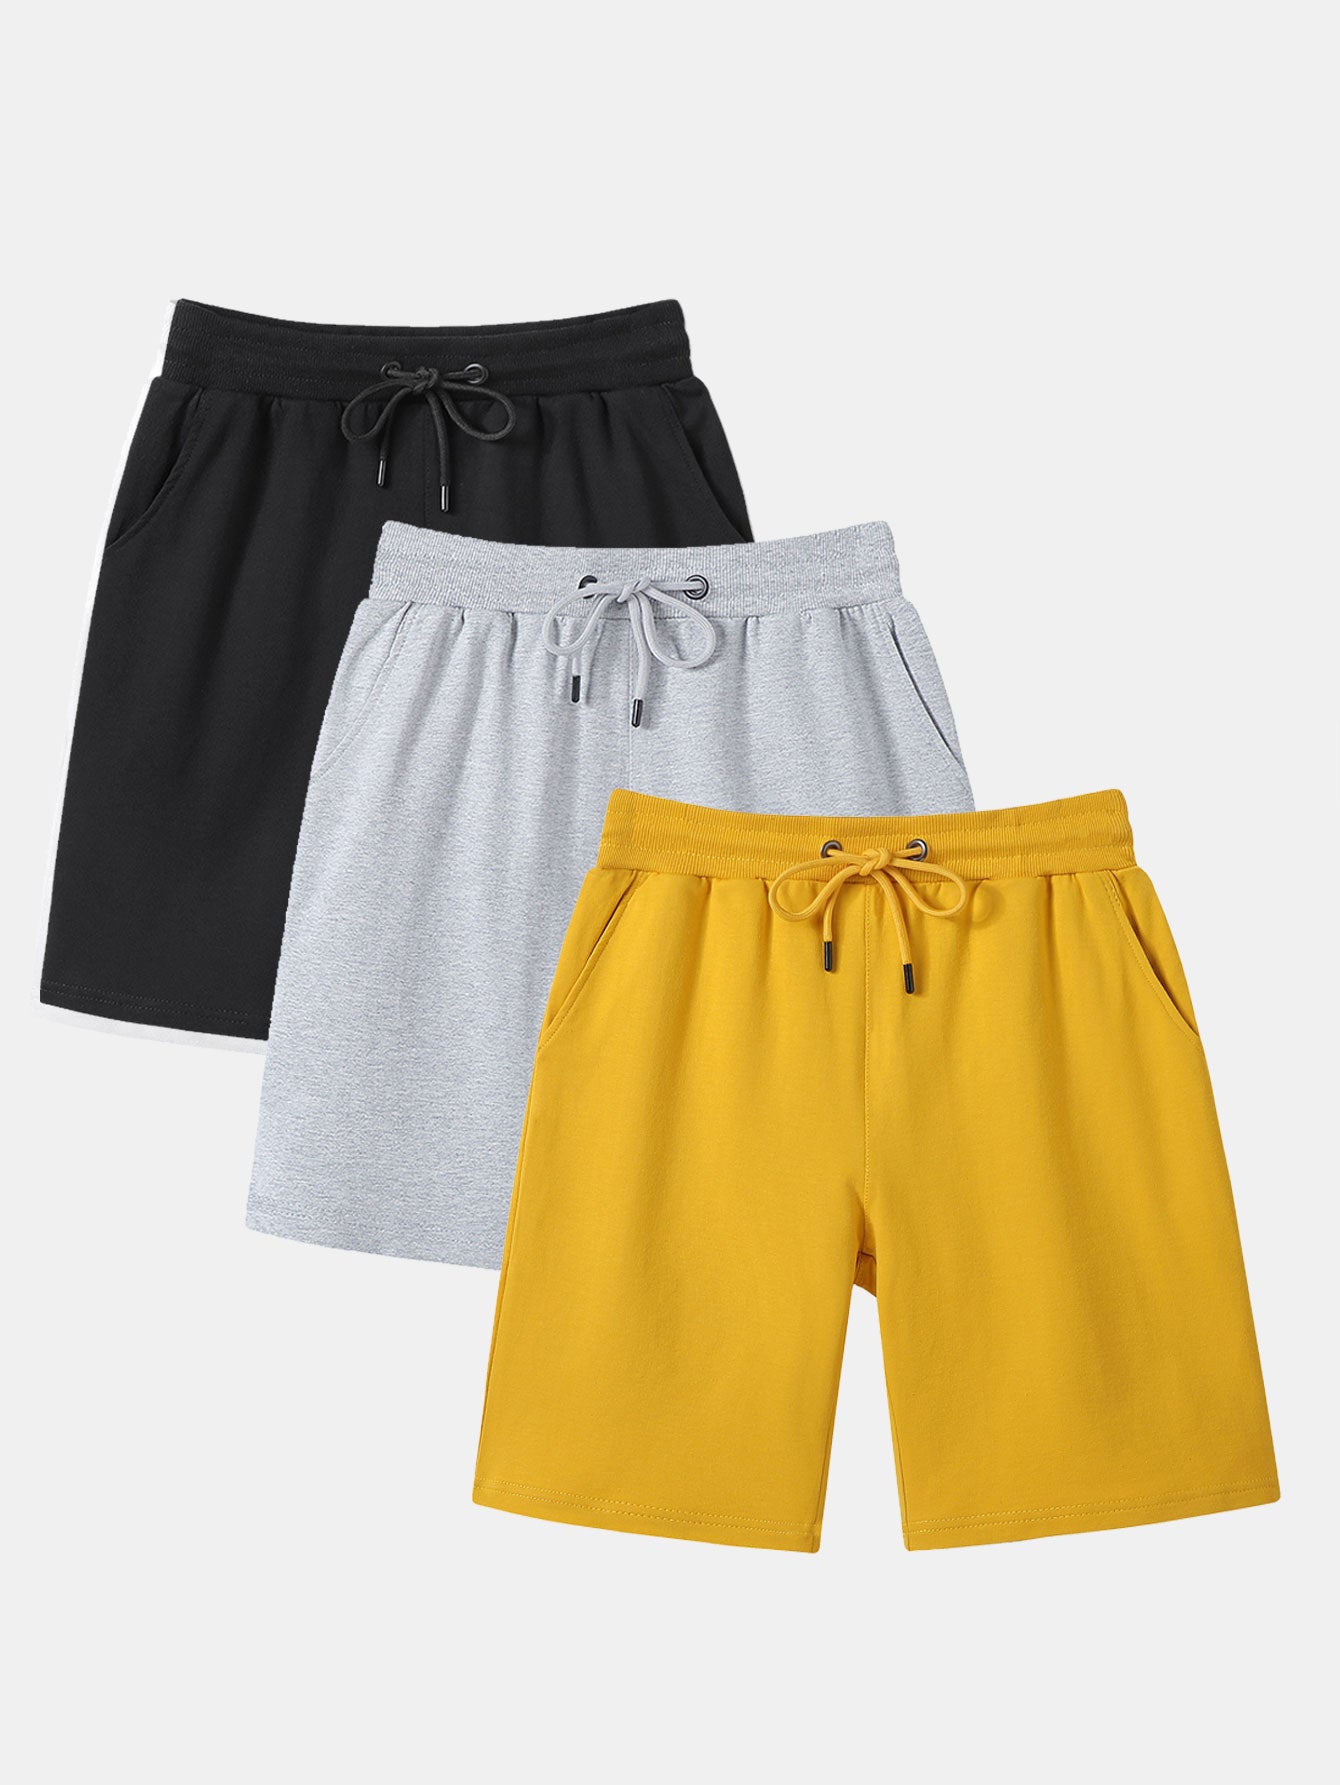 3 Pieces Mid Length Shorts